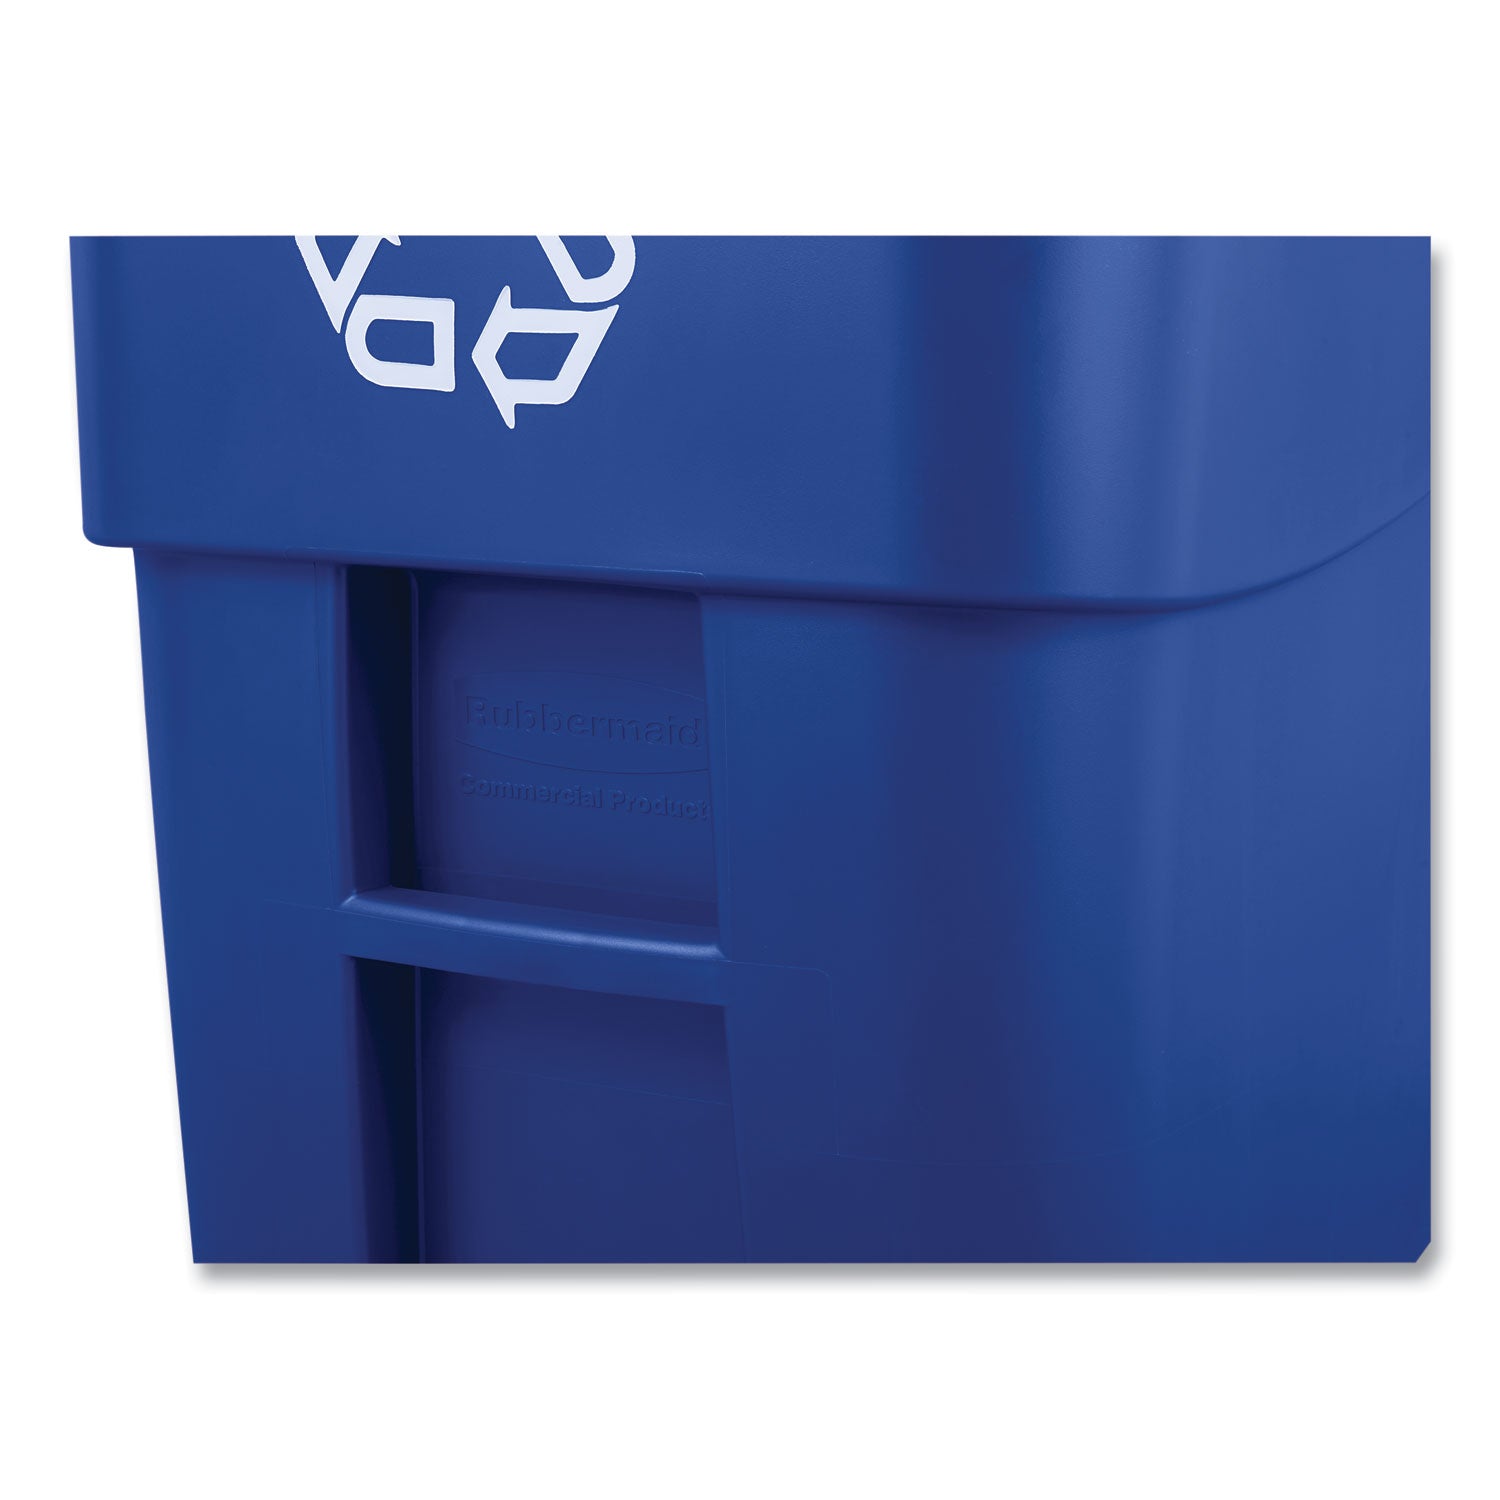 Square Brute Recycling Rollout Container, 50 gal, Plastic, Blue - 